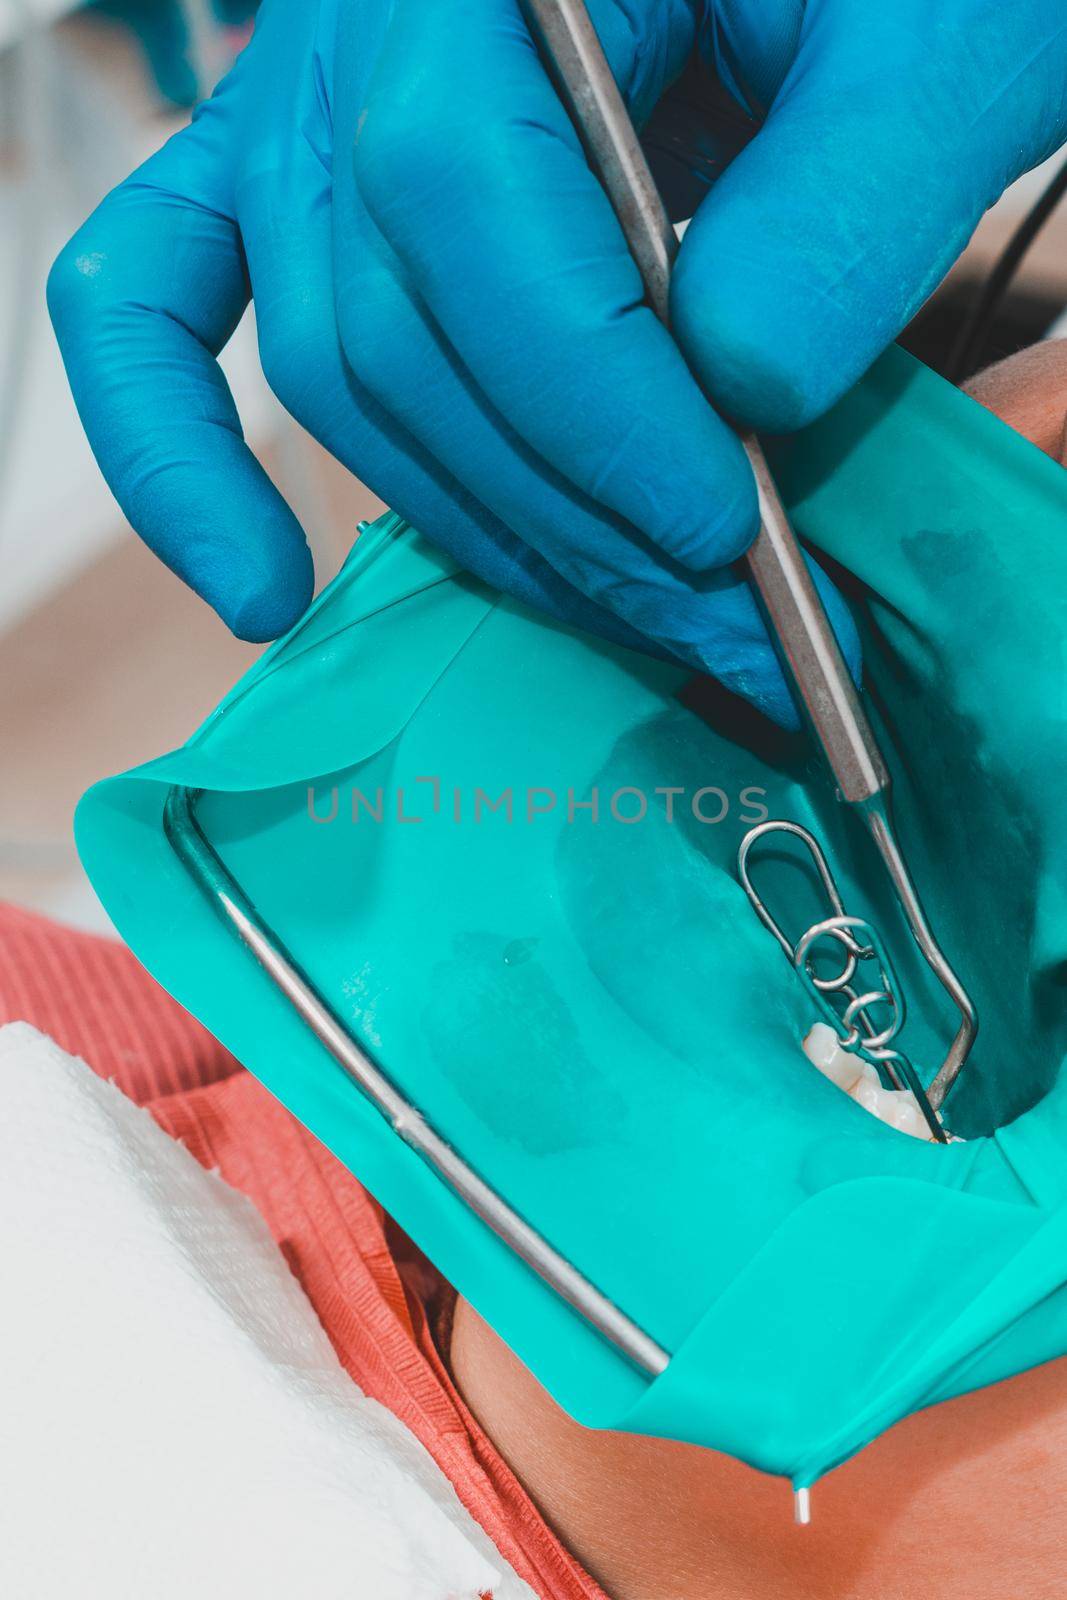 Dental restoration and polymerization of tooth composite materials, the doctor conducts sterile work on tooth restoration.2020